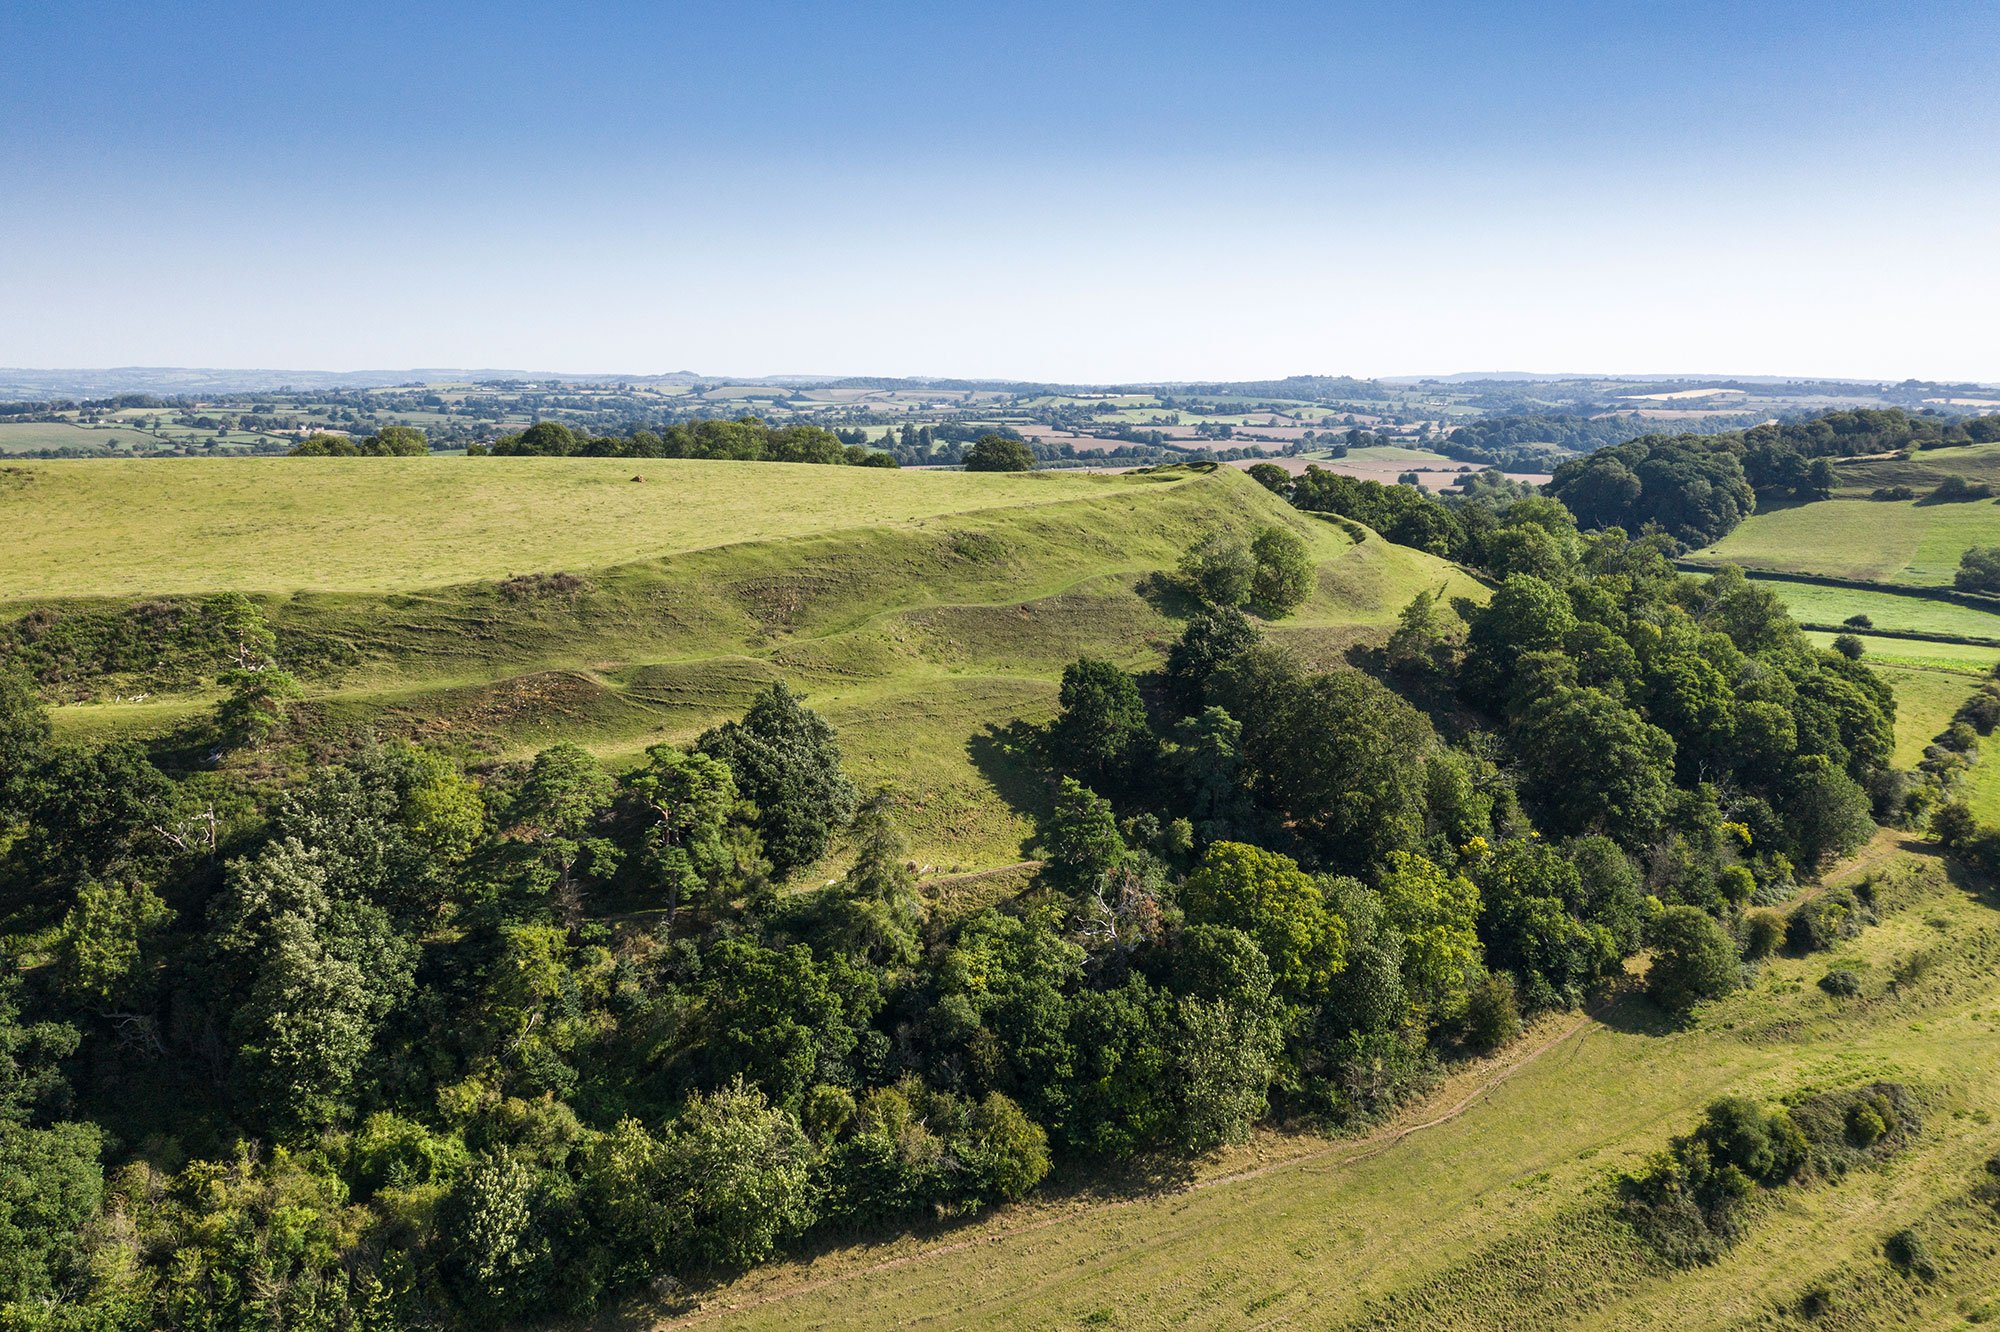 Aerial view of hill fort surrounded by trees.